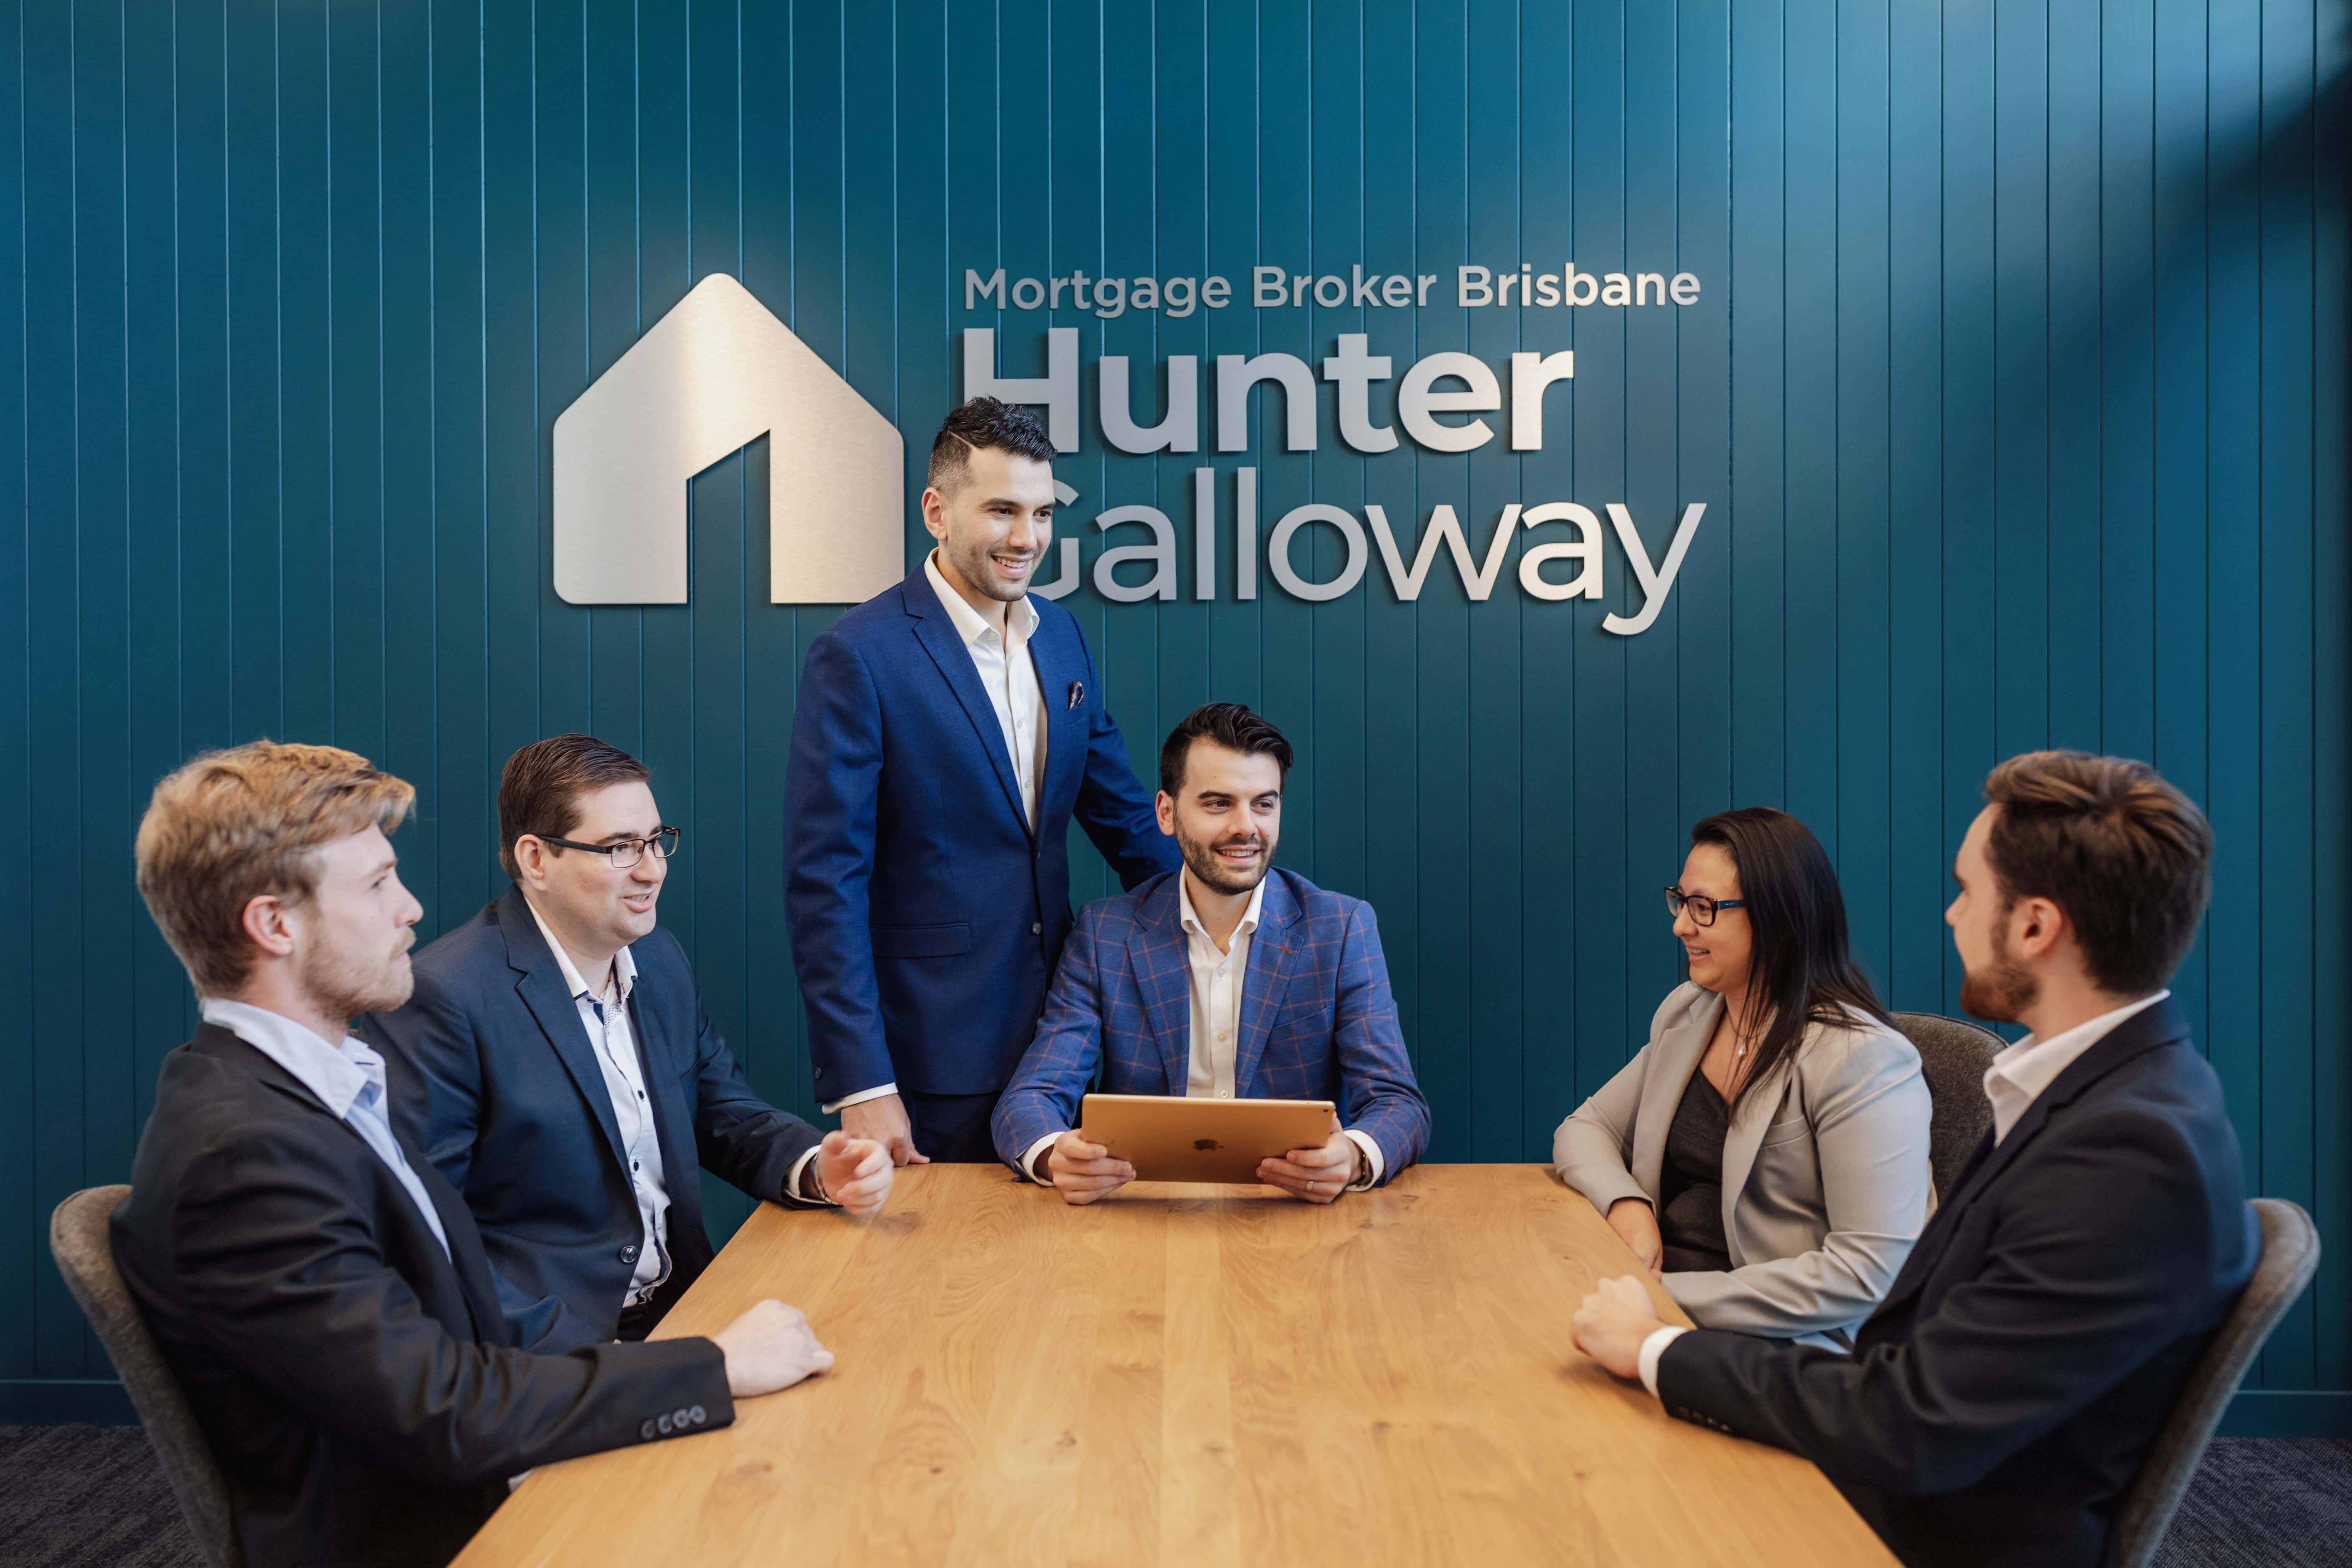 Mortgage Broker Brisbane - Hunter Galloway - Fortitude Valley, AU, calculate a home loan
